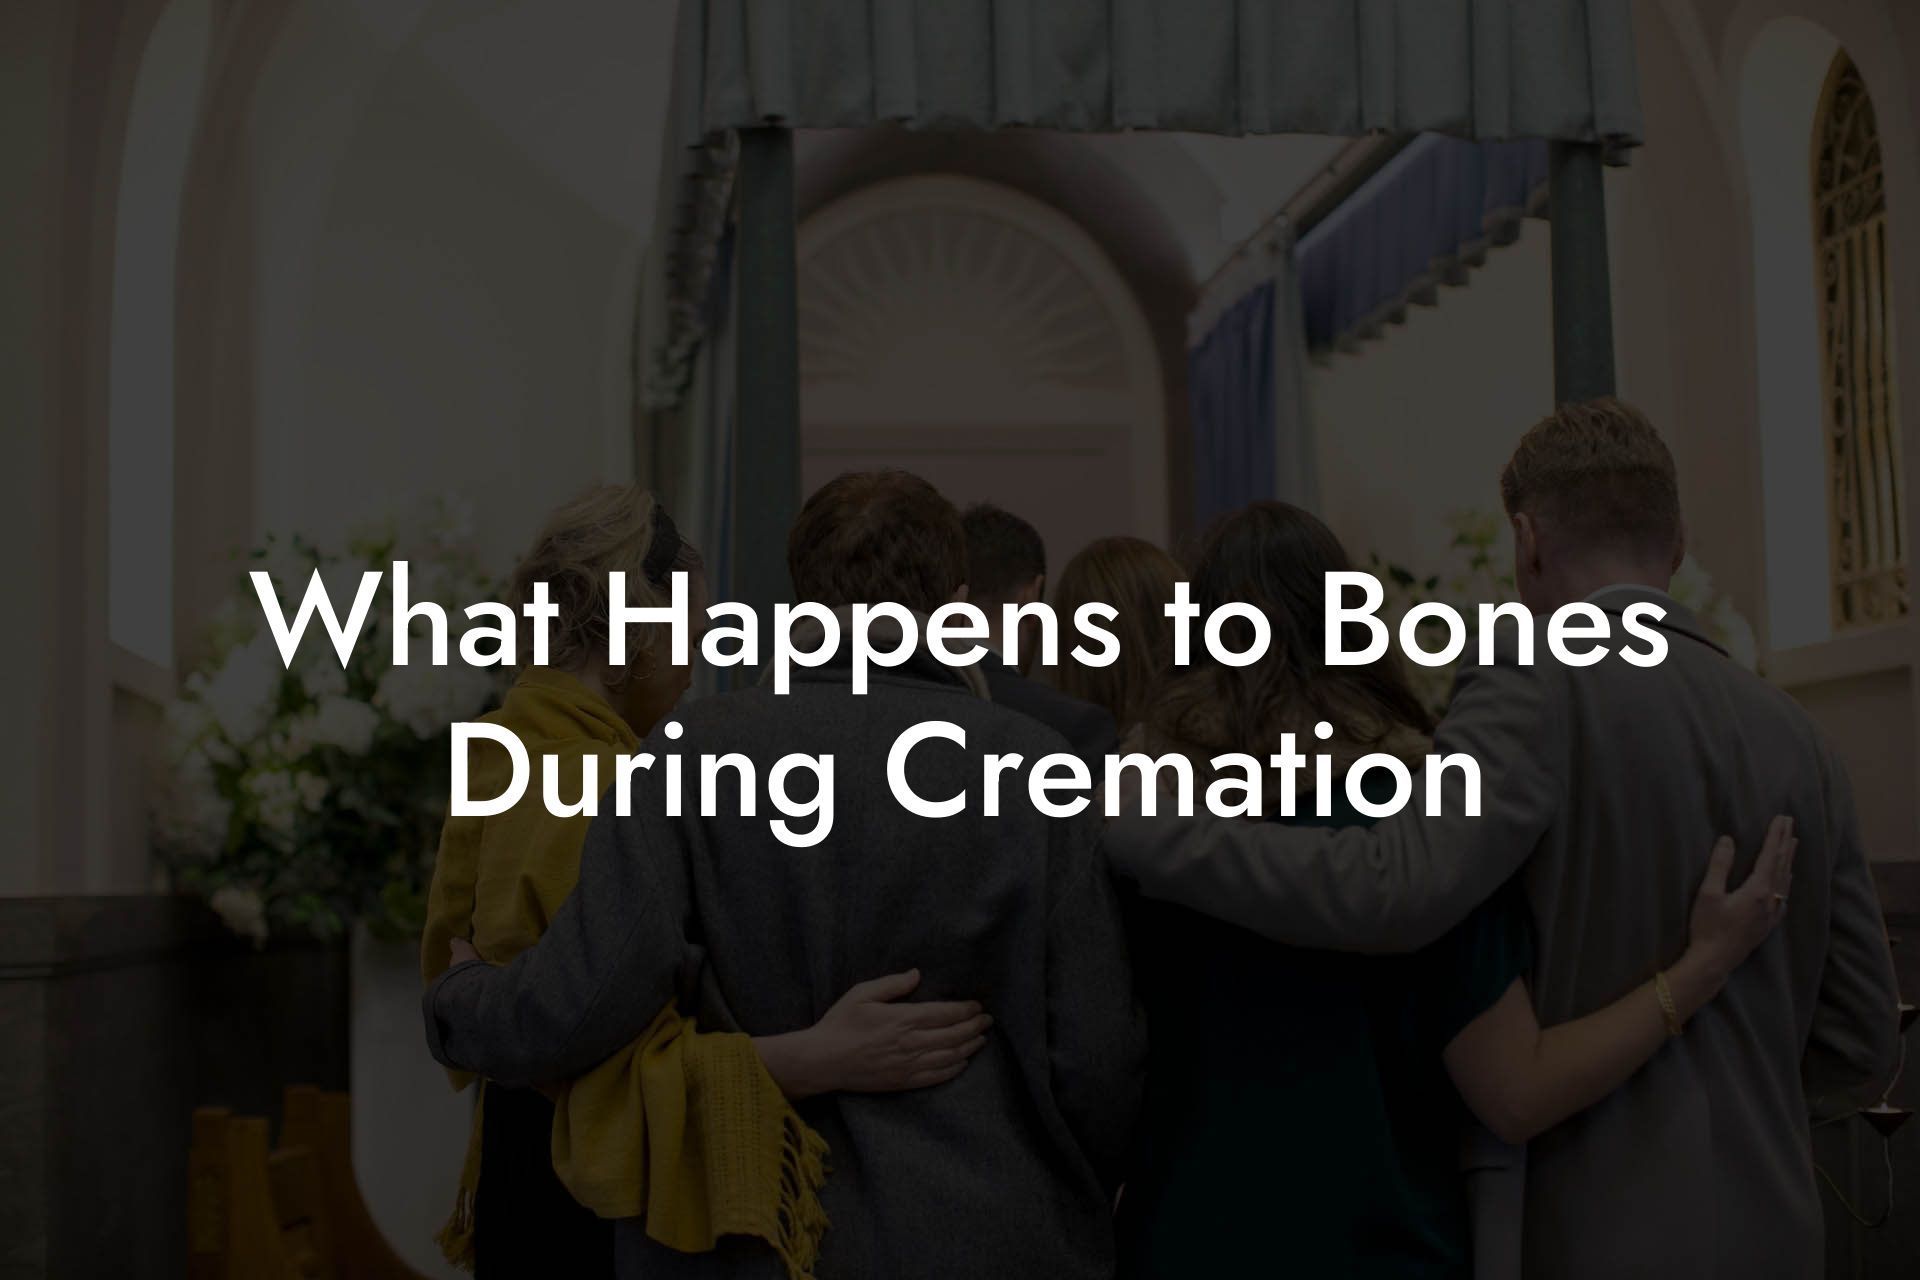 What Happens to Bones During Cremation